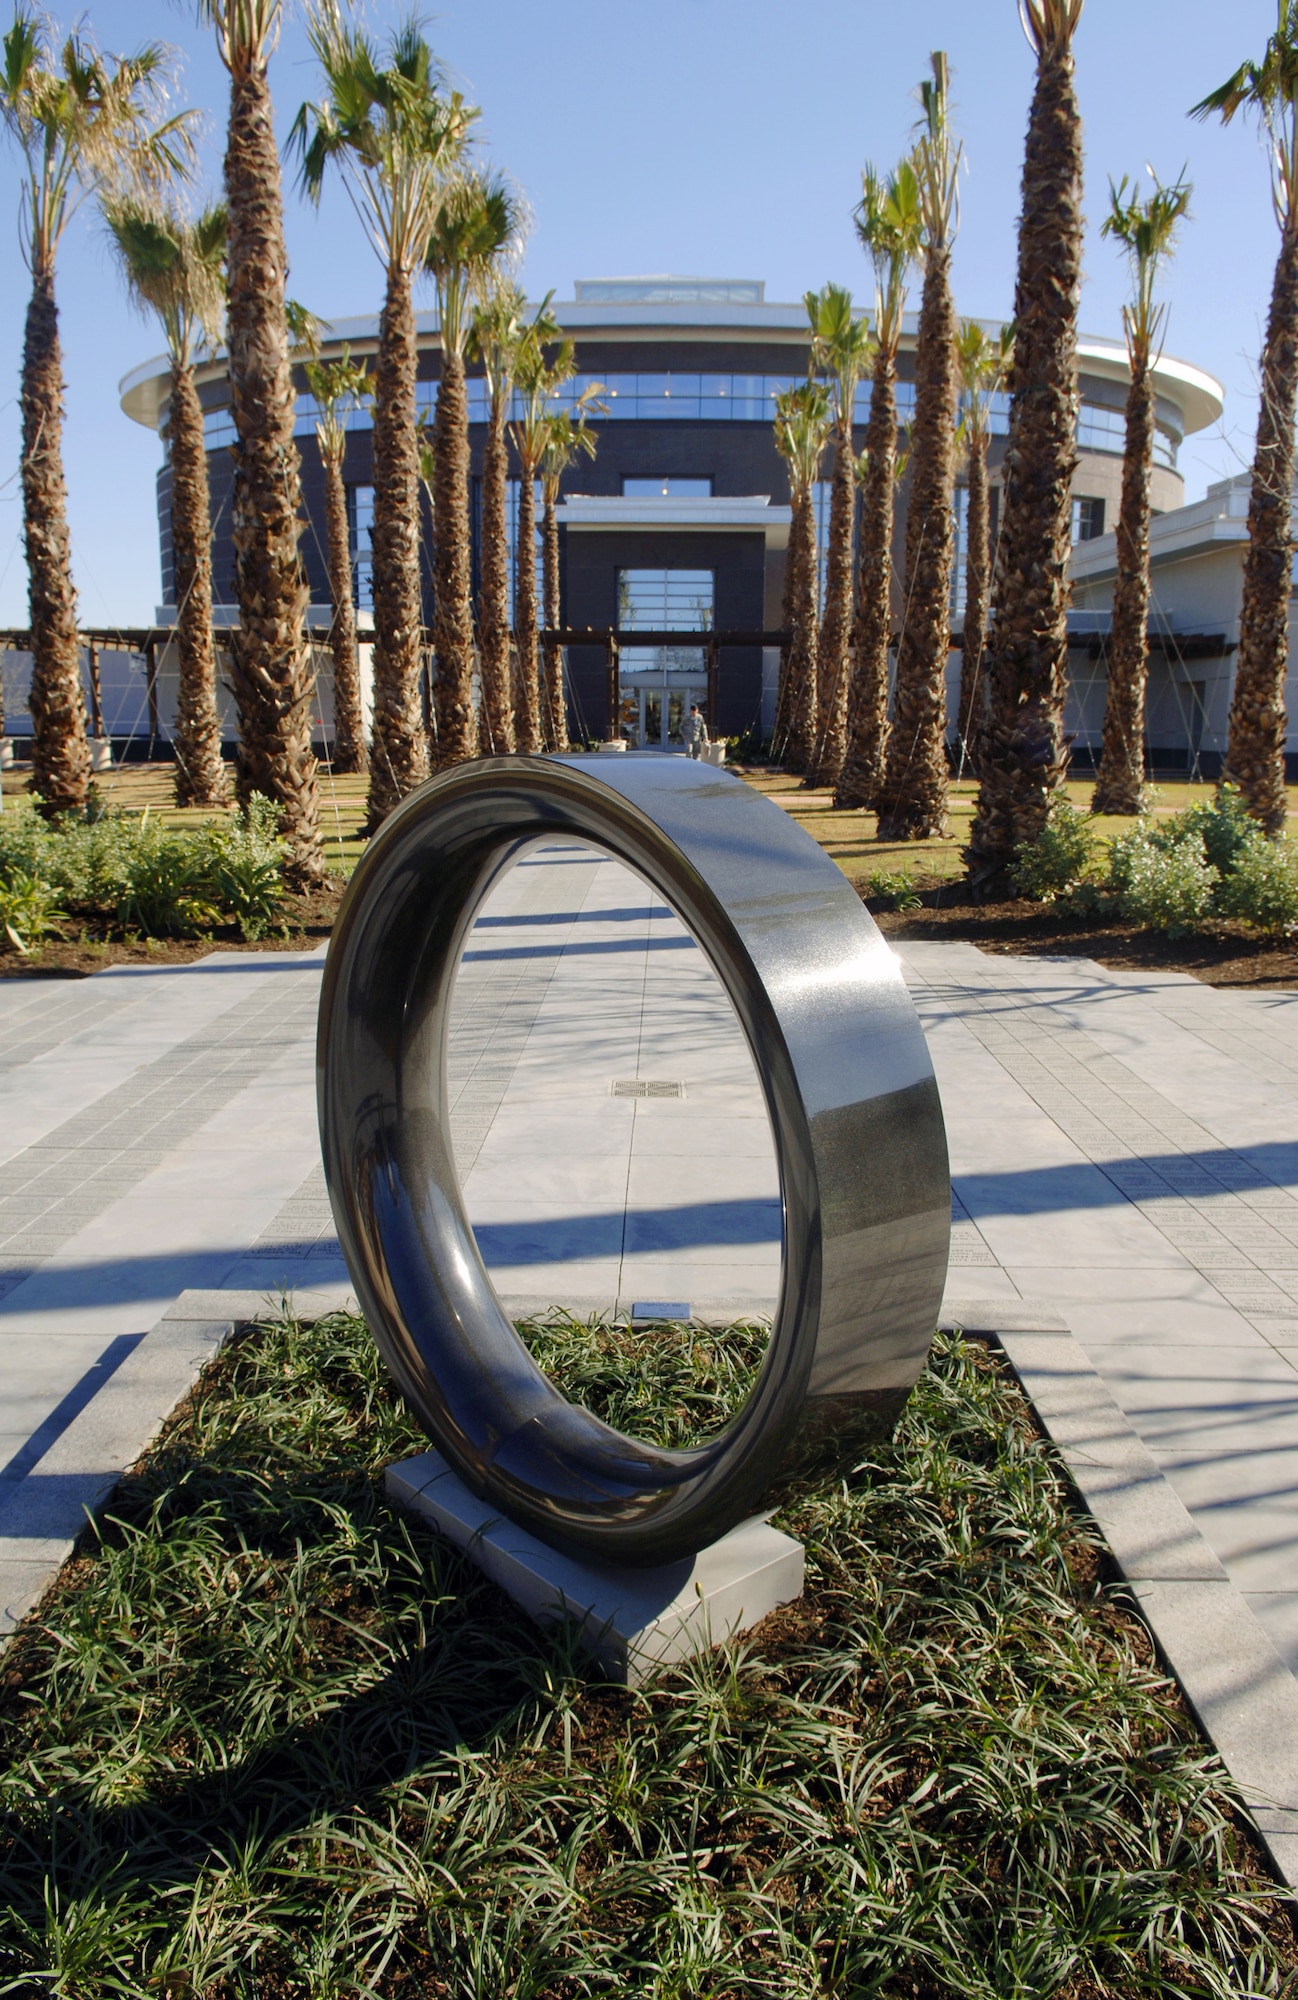 The symbol of a broken ring, cracked but still intact, marks the entrance to the new Center for the Intrepid, a 65,000-square-foot rehabilitation center next to Brooke Army Medical Center in San Antonio. (U.S. Air Force photo/Daren Reehl)